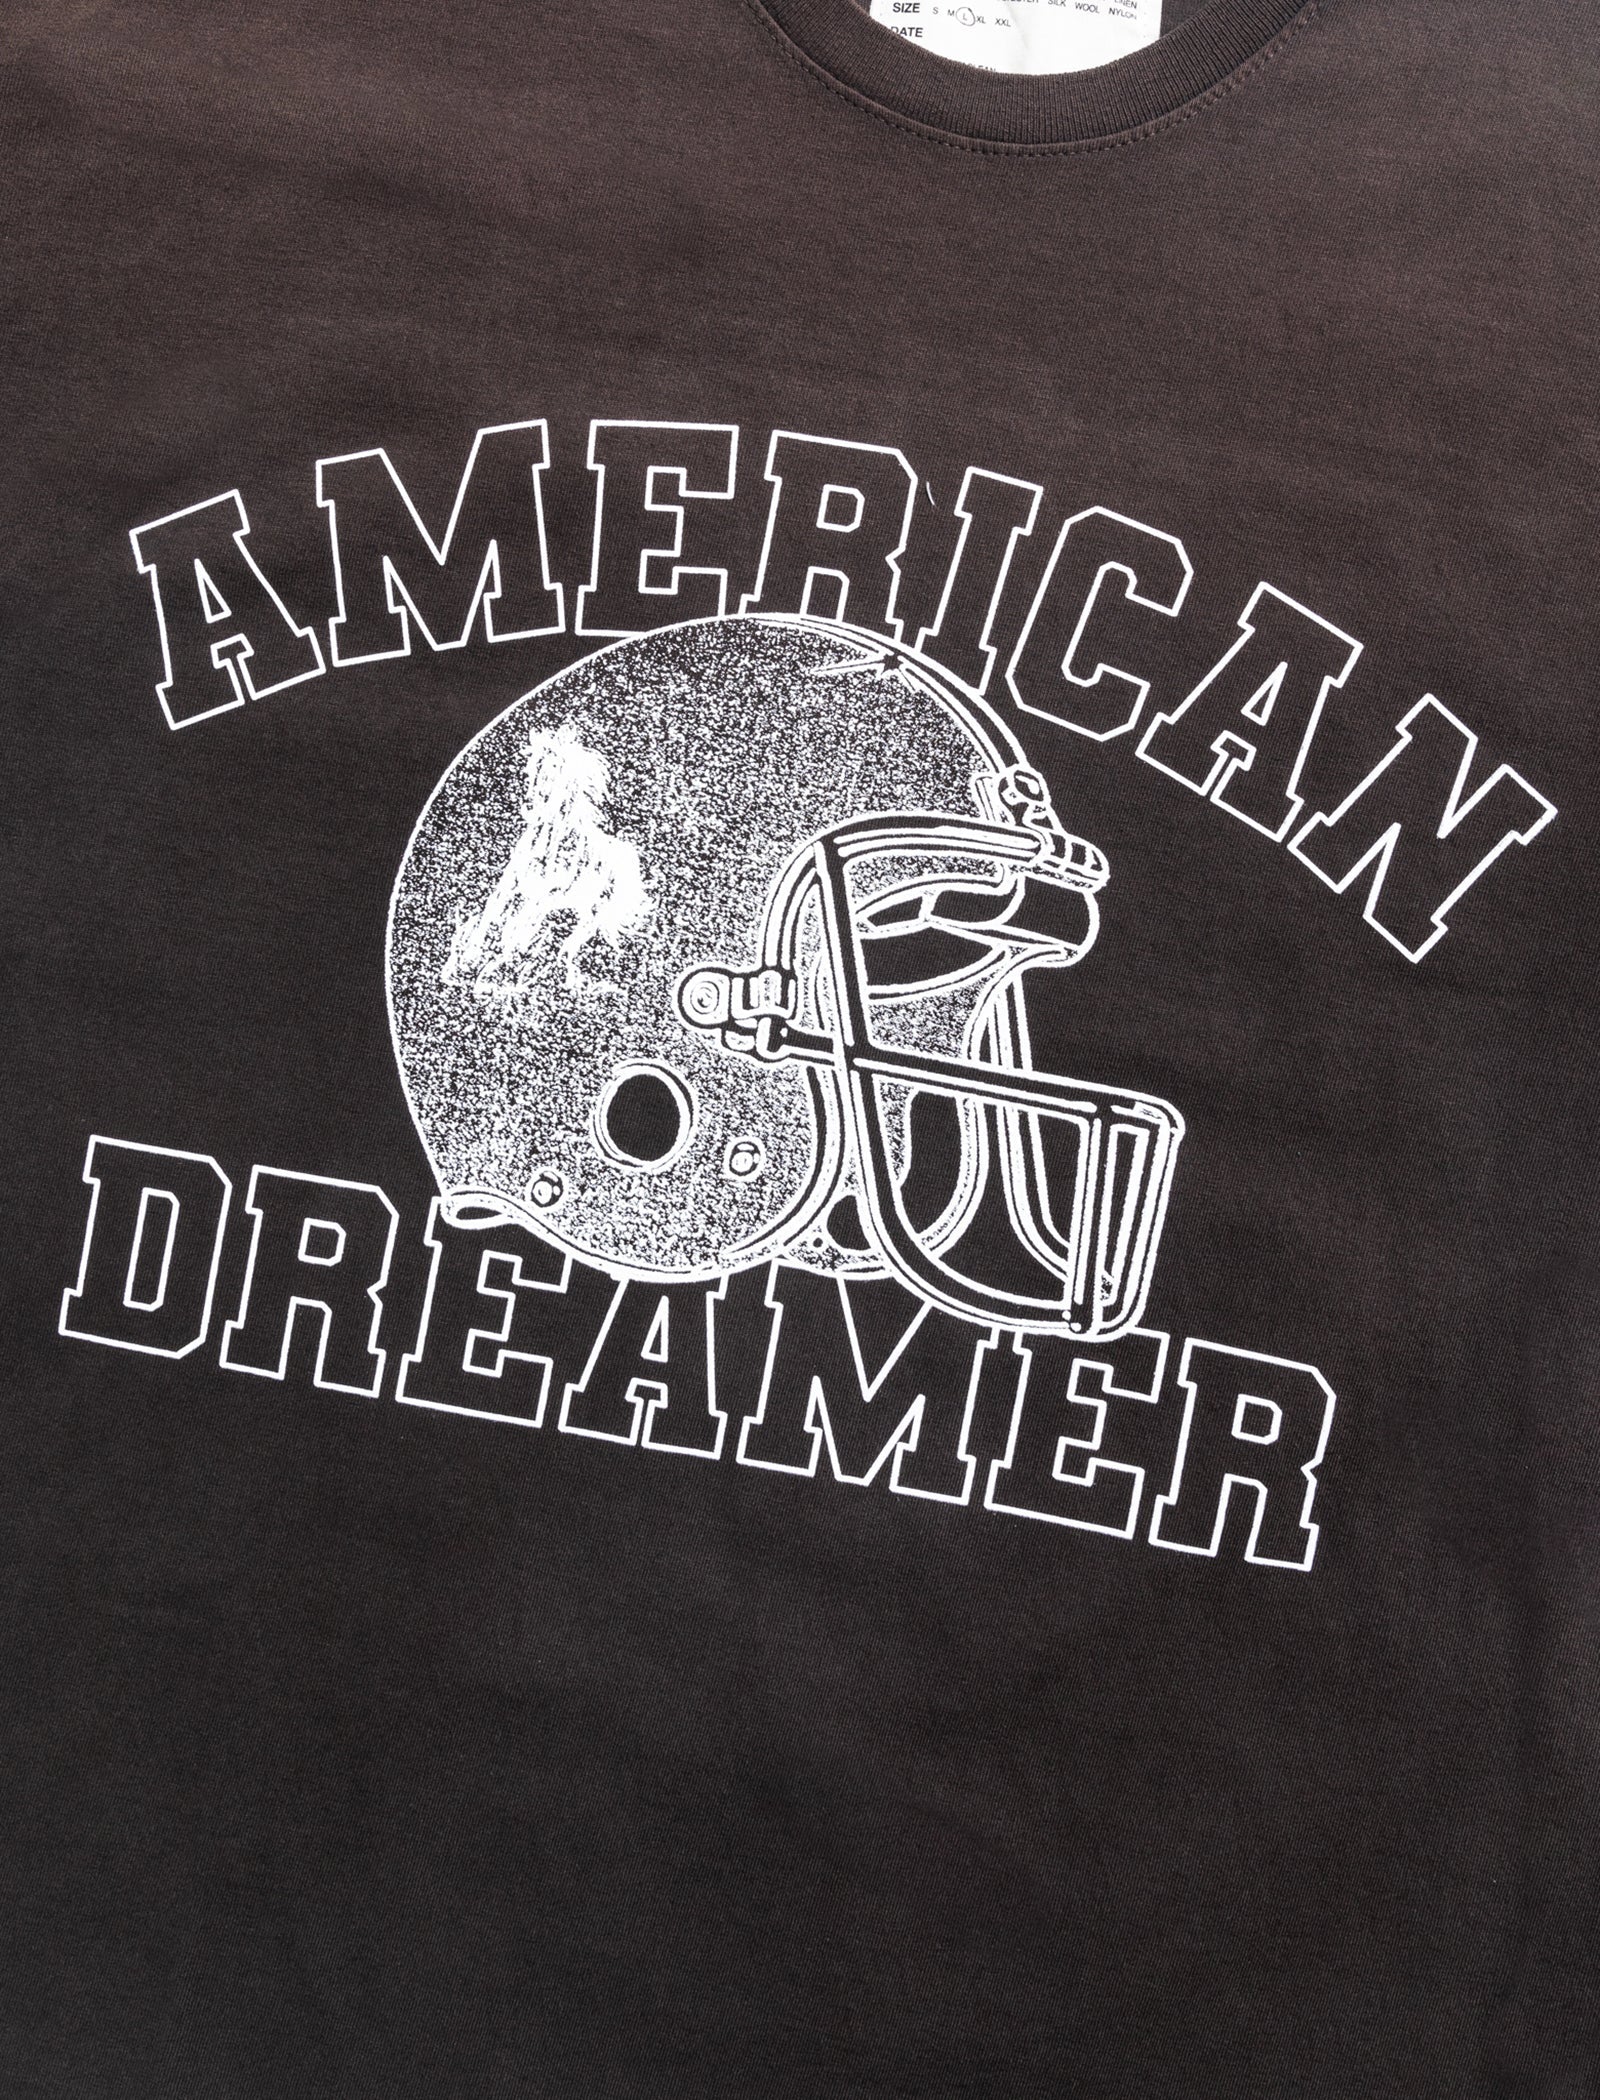 ONE OF THESE DAYS AMERICAN DREAMER T SHIRTS